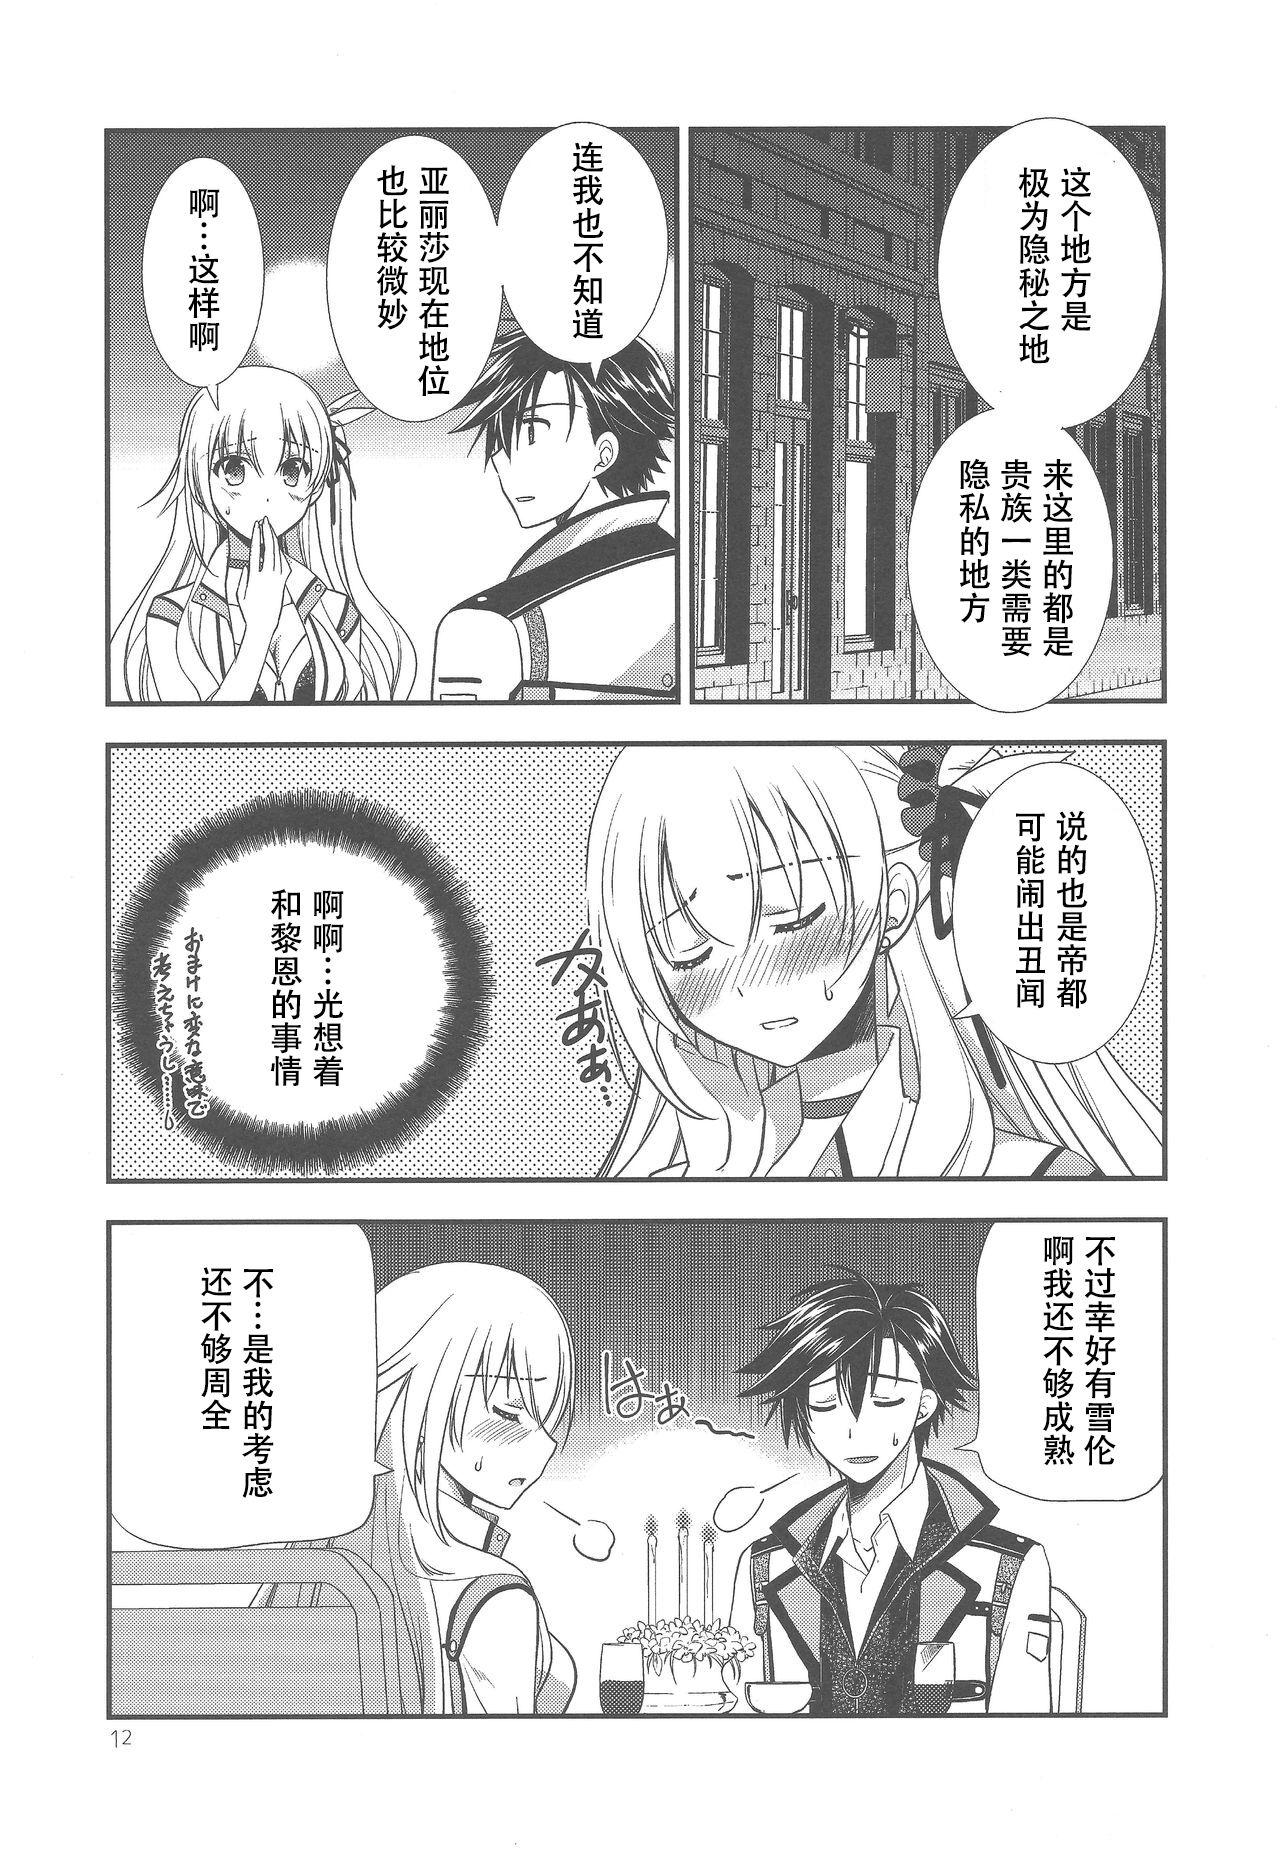 Cheating Wife Houkago Date - The legend of heroes | eiyuu densetsu Blows - Page 10